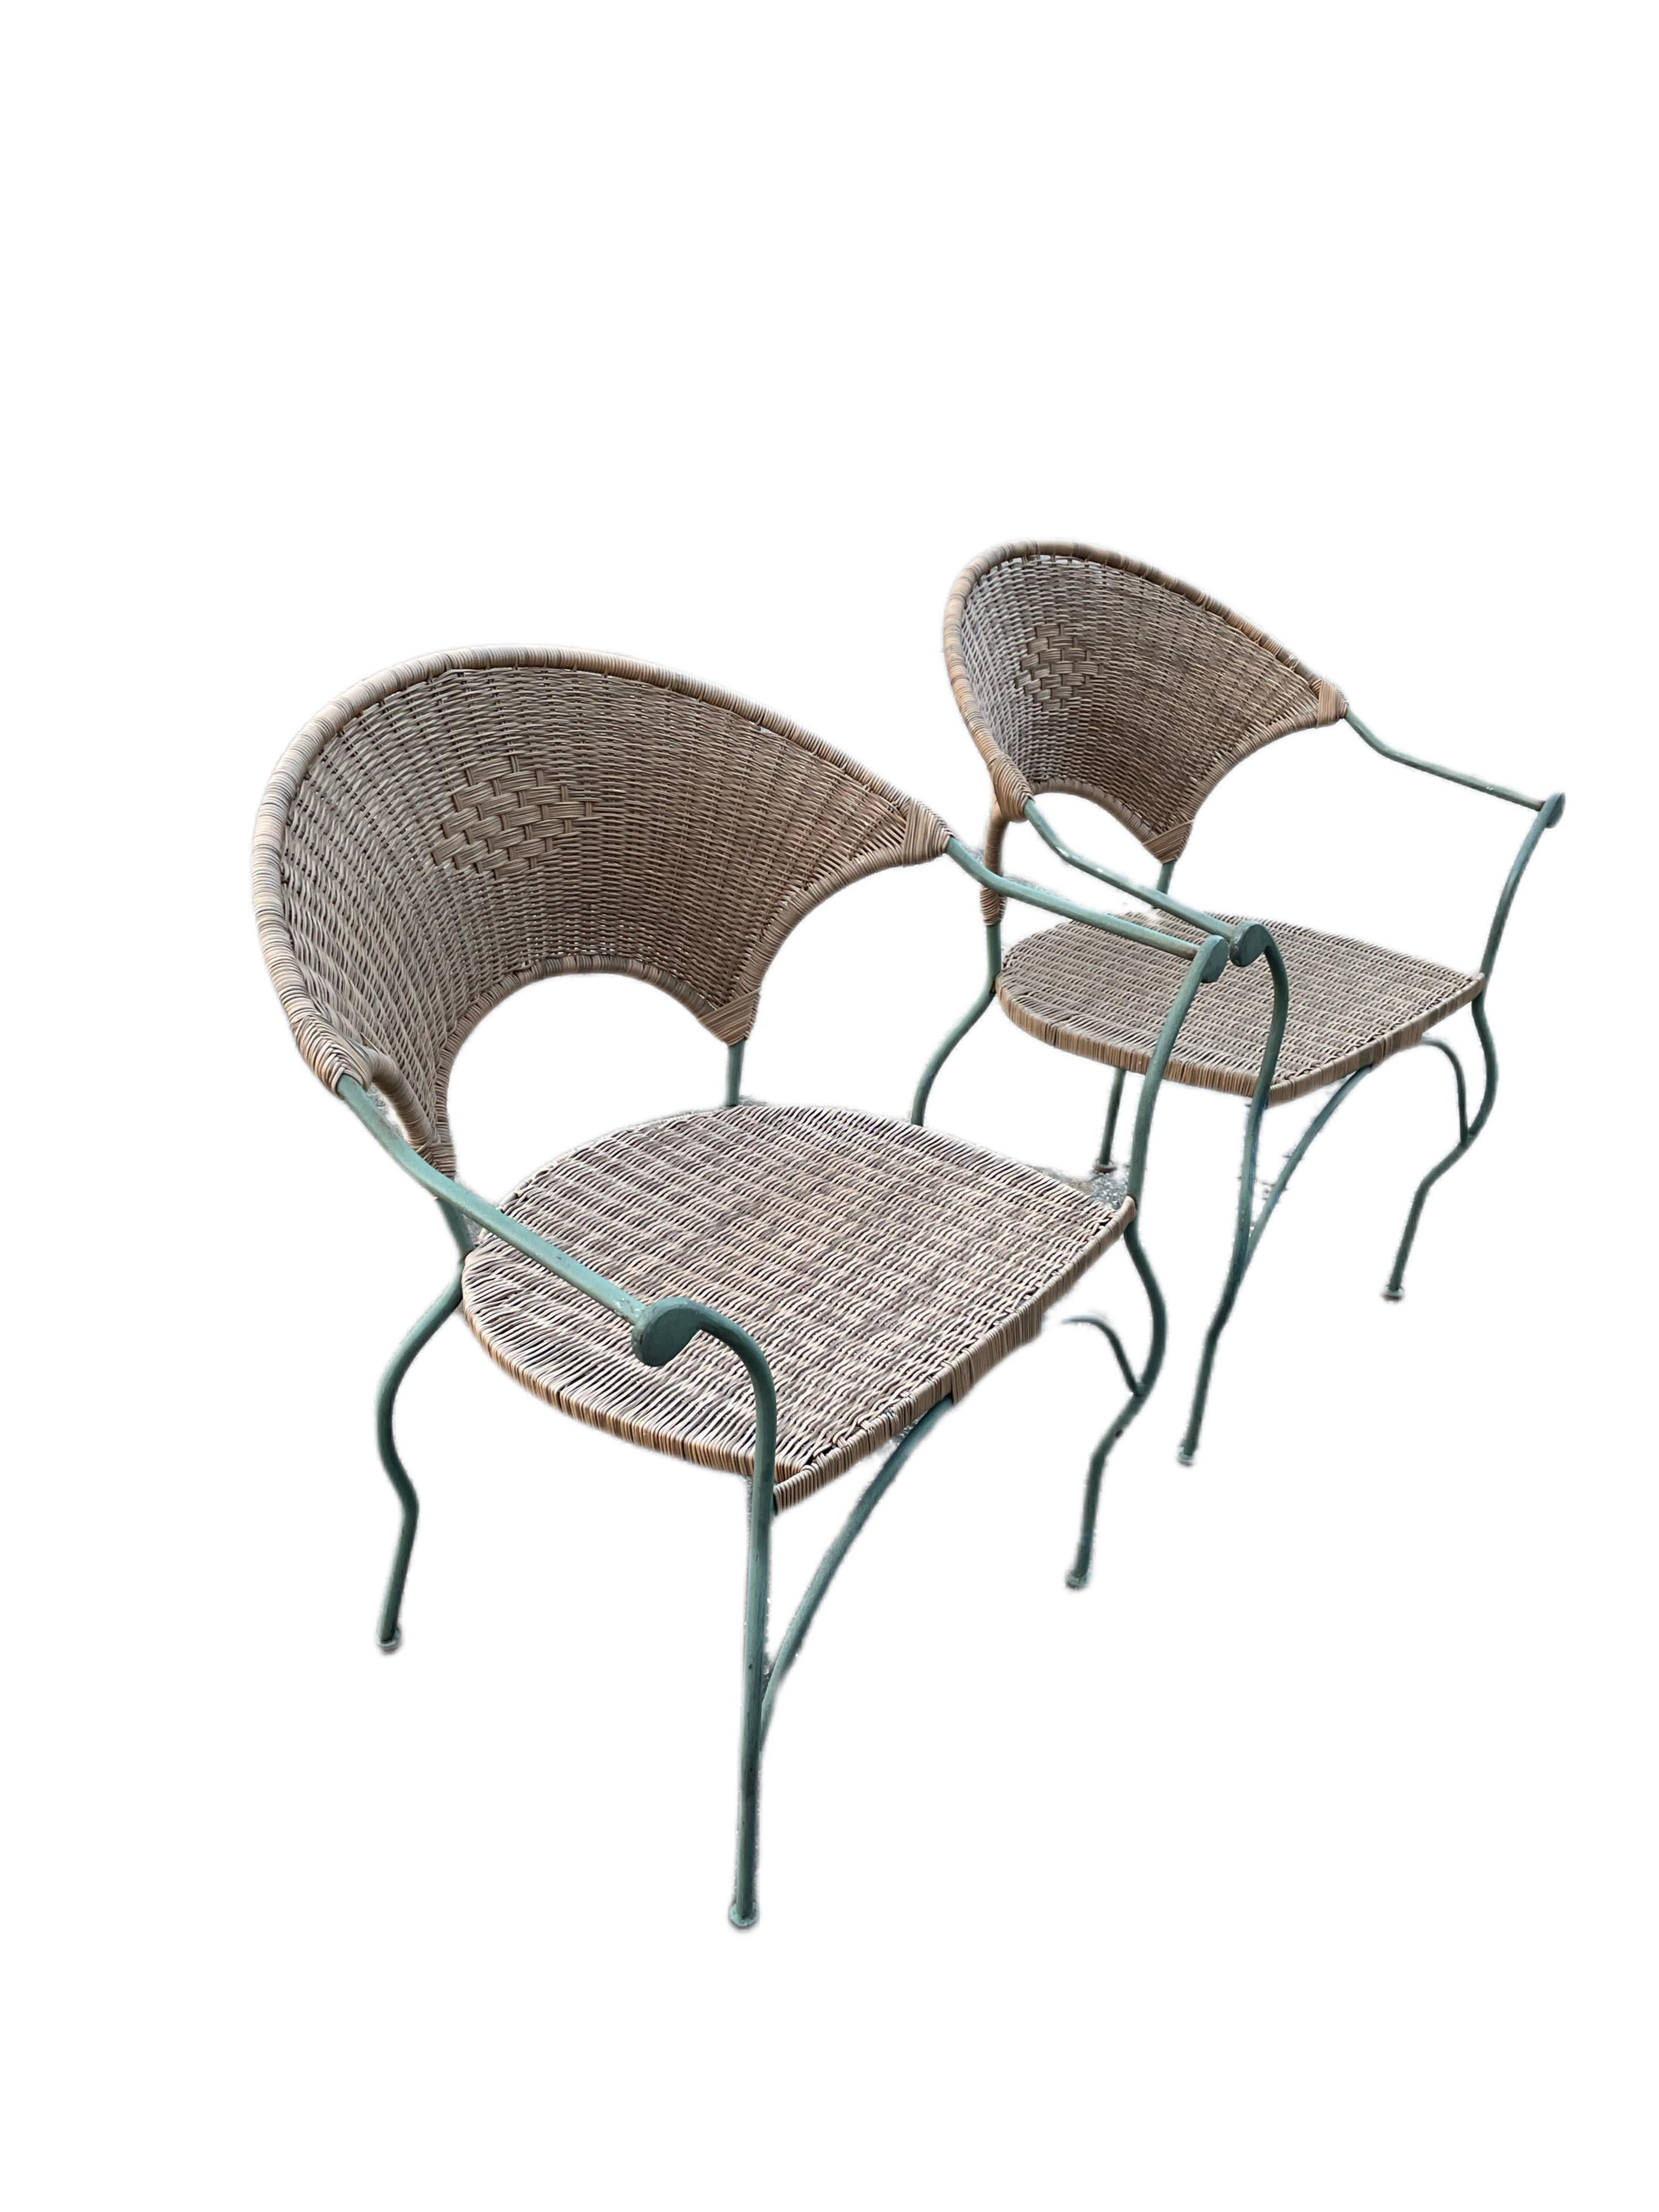 Available now for your enjoyment and ready to ship is a pair Vintage Wrought Iron Patio Lounge Chair with Wicker Seating and Backrests.

This lovely Wrought Iron Set of 6 Chairs are the perfect addition to any garden, terrace, or veranda. Enjoy a